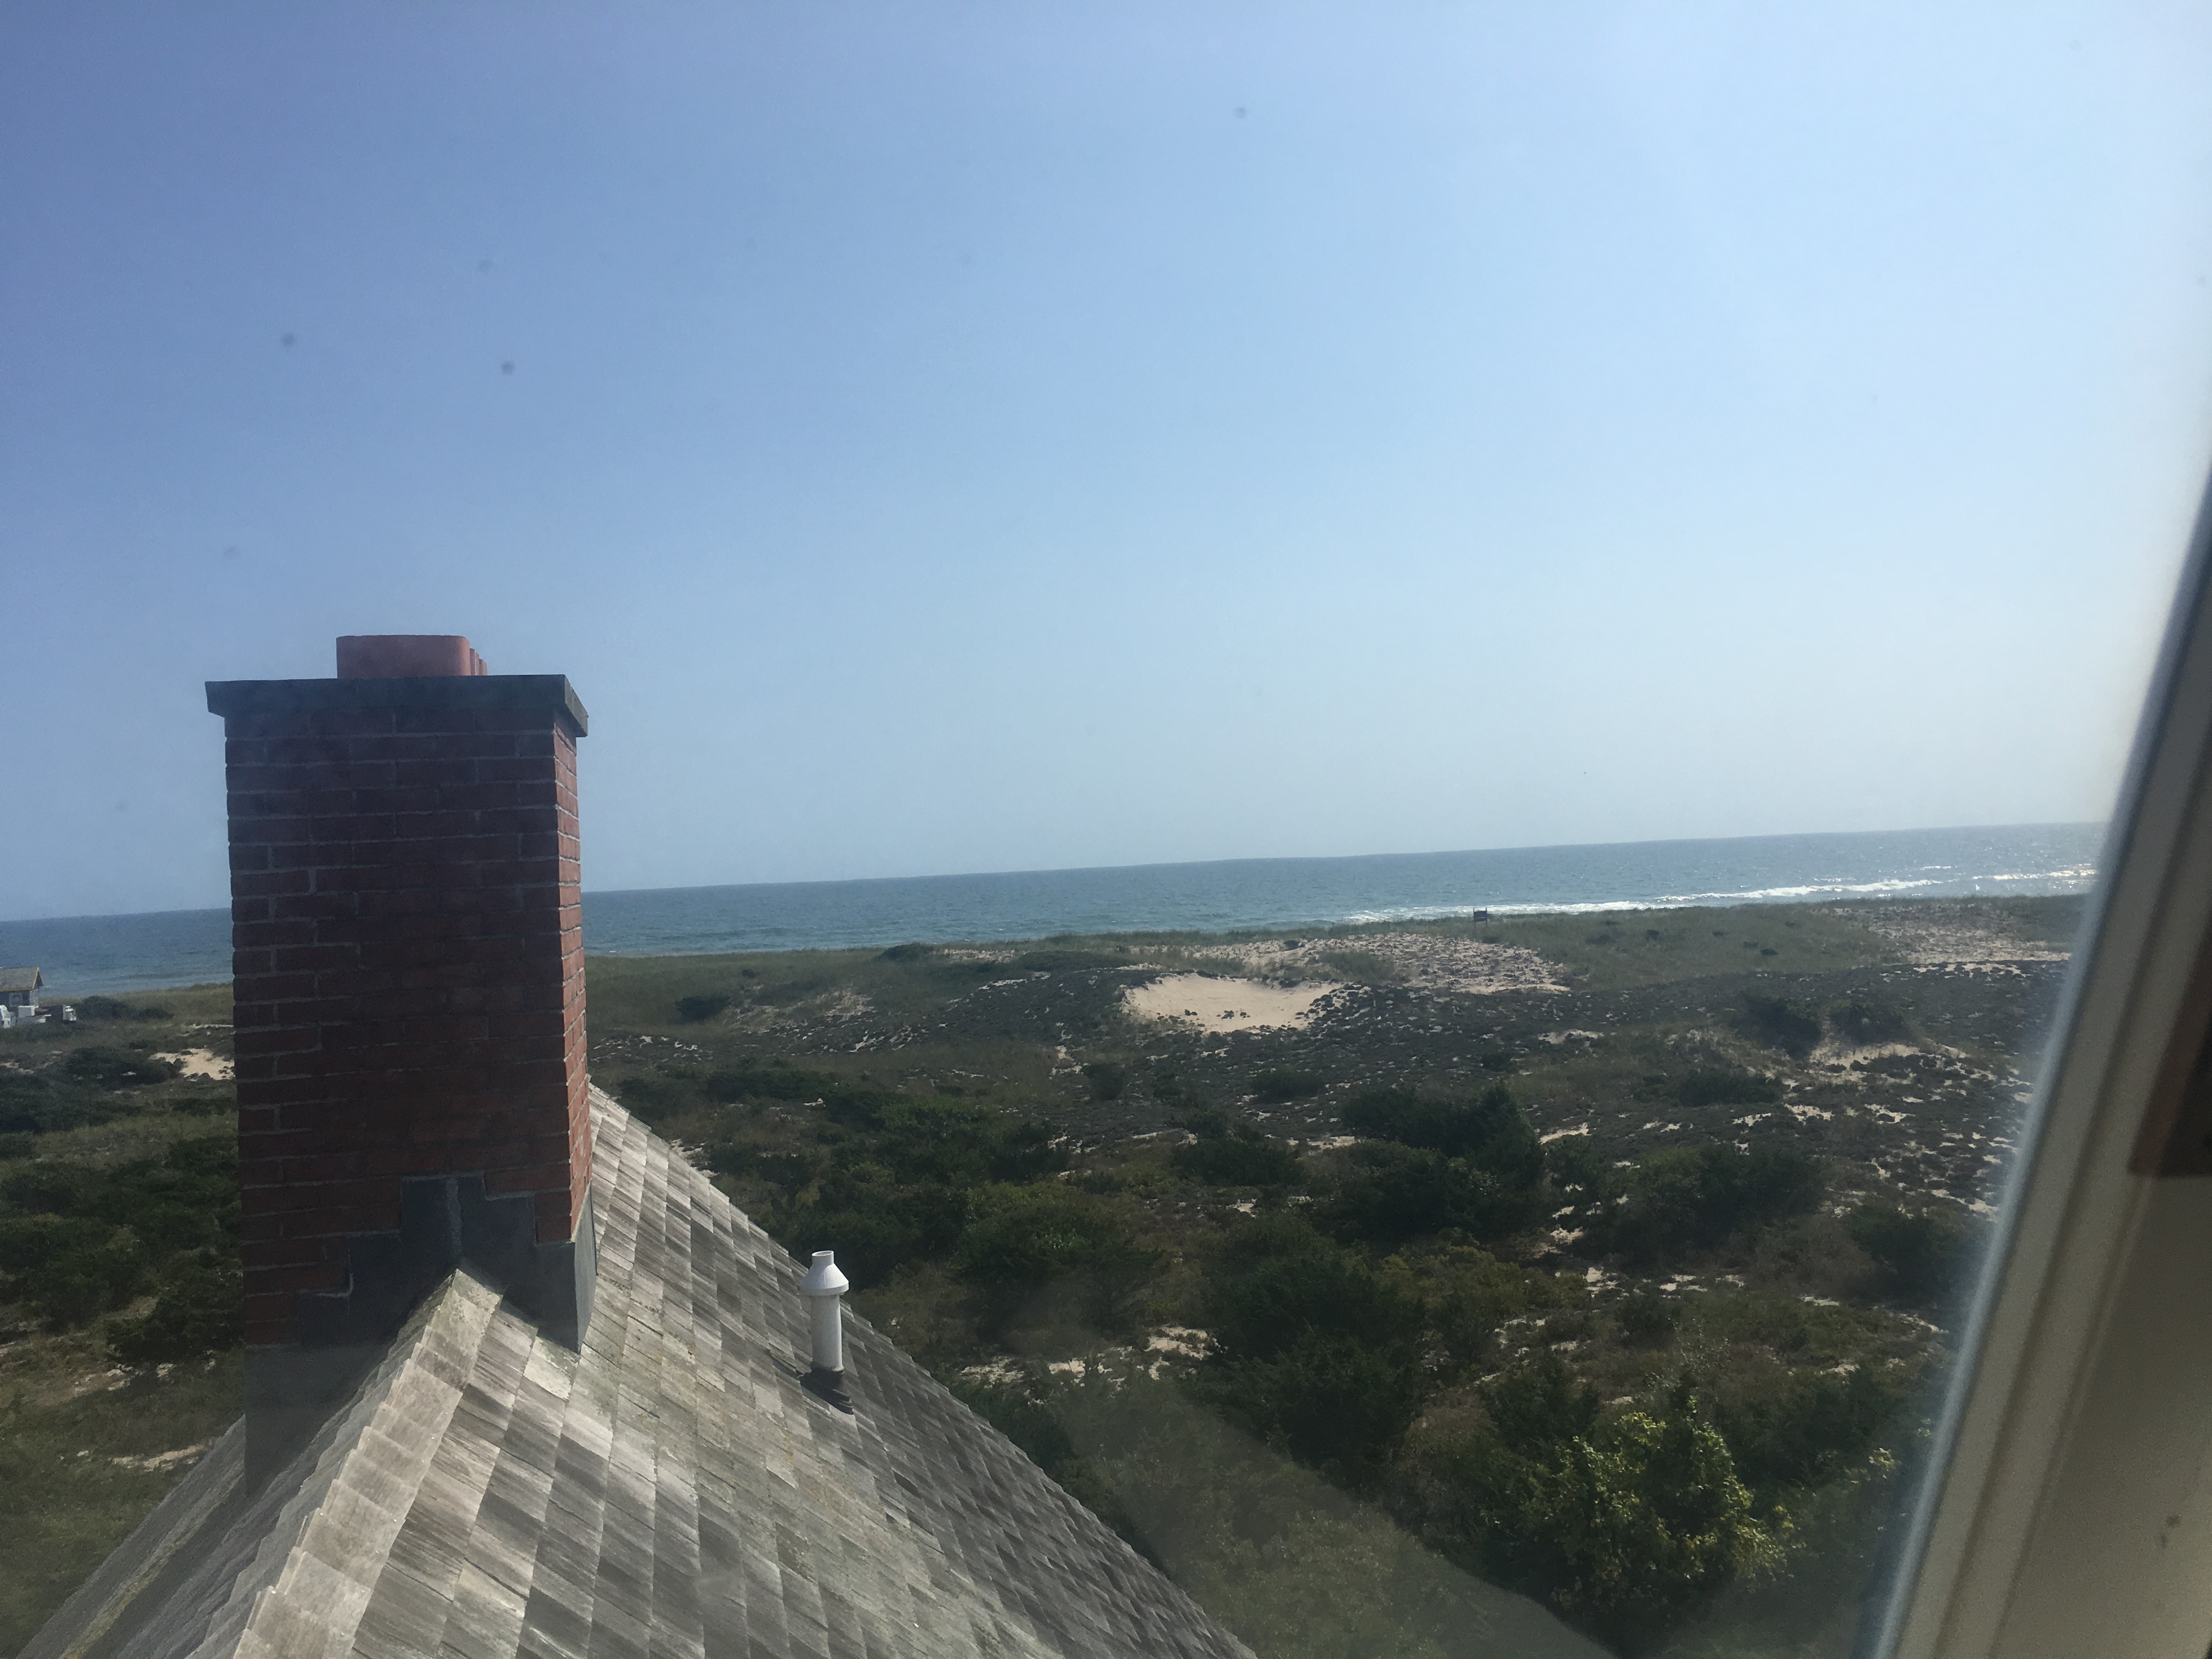 View out the window towards the ocean of the Amagansett Life-Saving Station